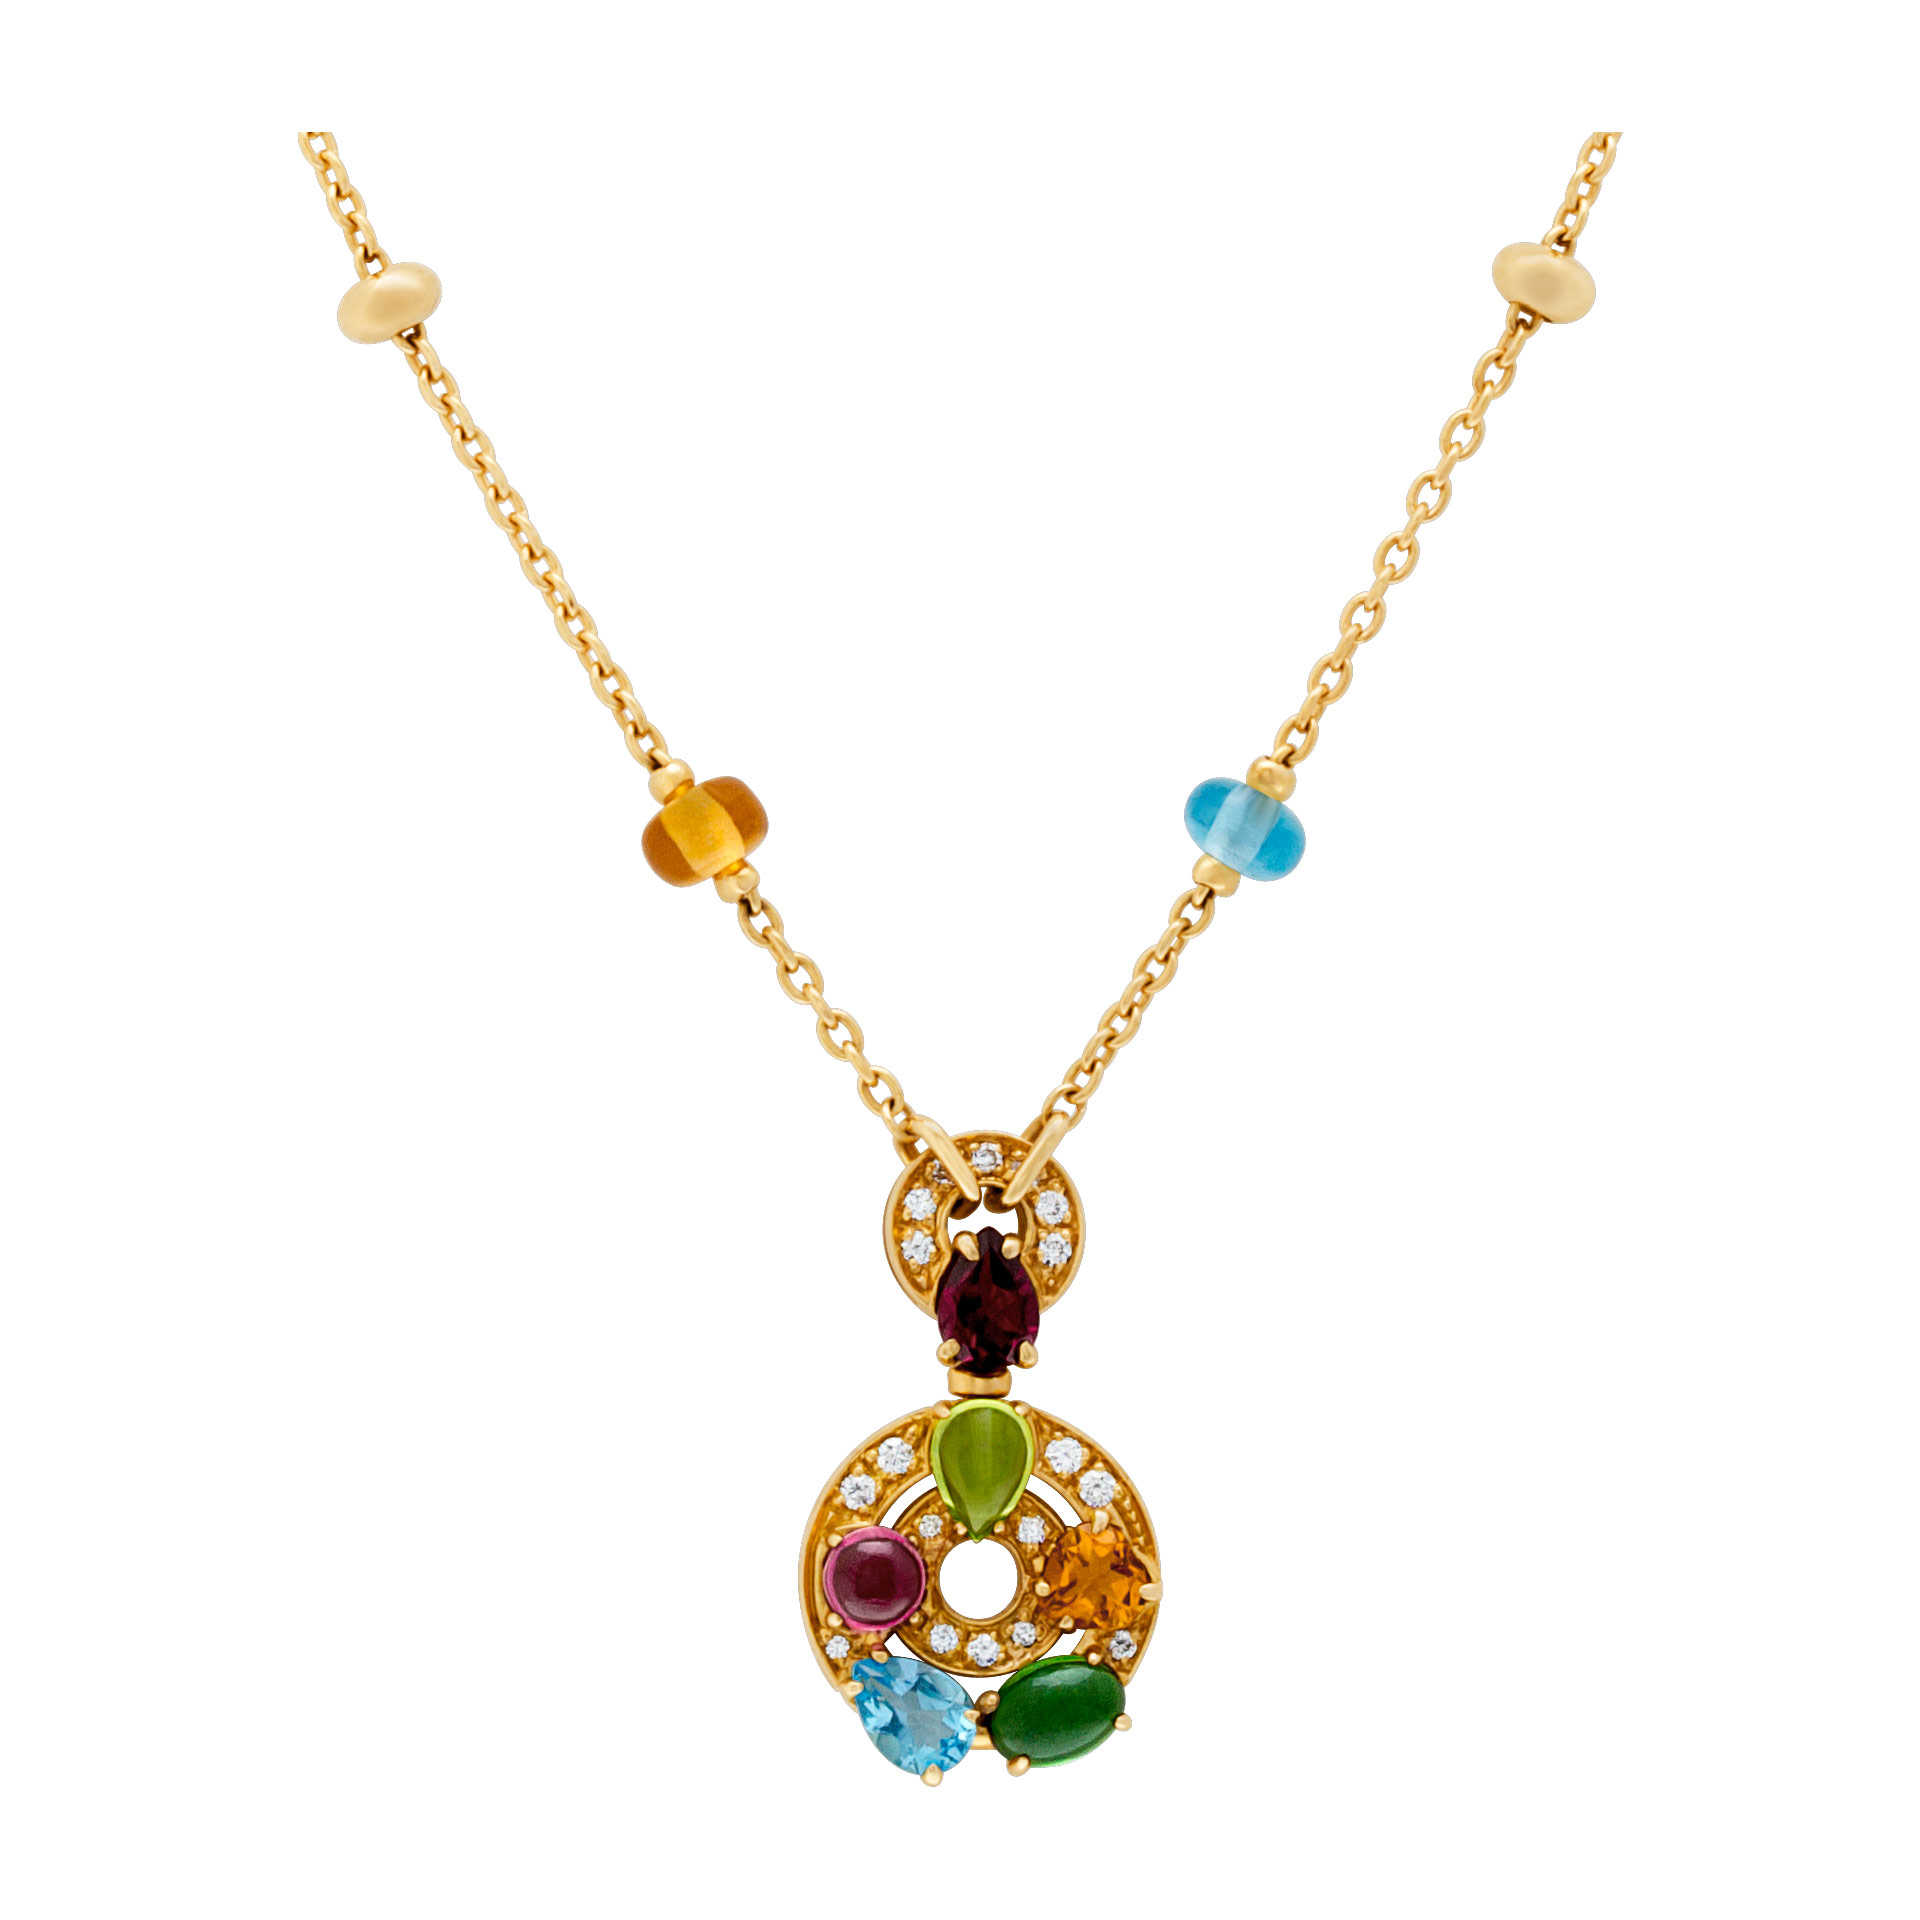 Bvlgari Astrale necklace in 18k yellow gold